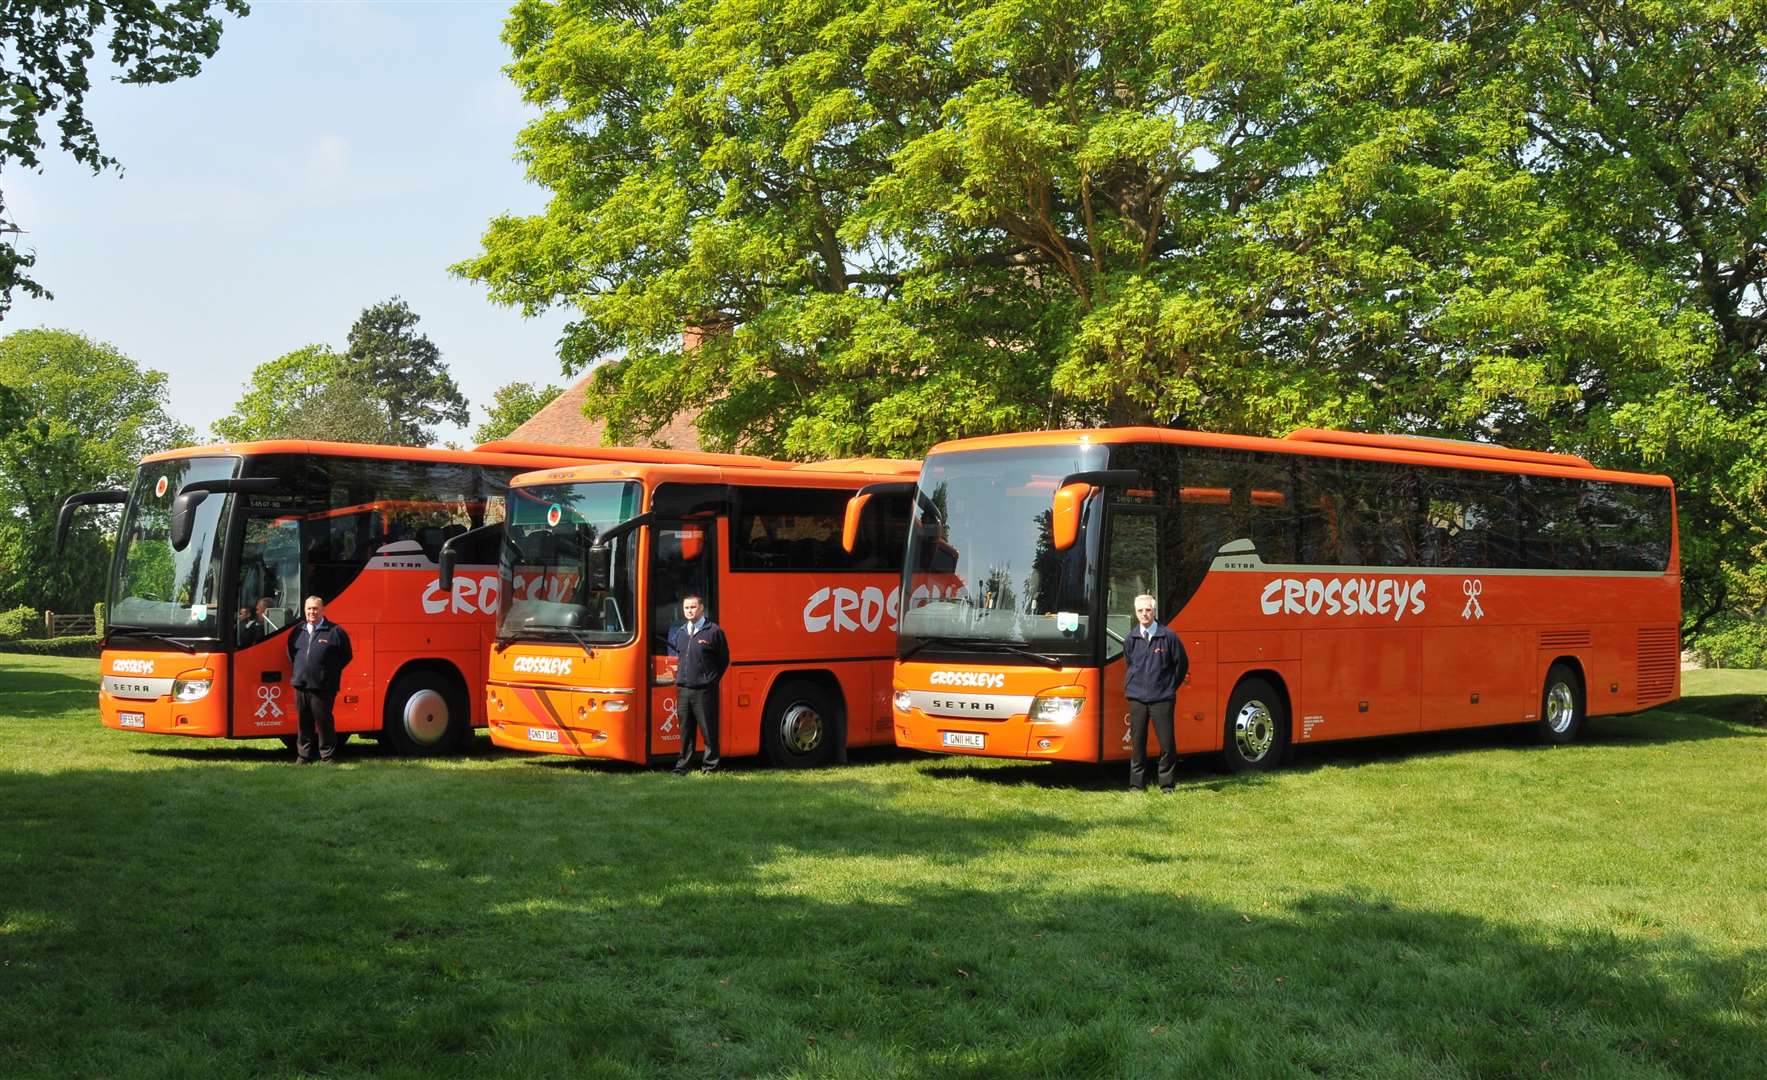 Crosskeys will make sure the winning pupils arrive at the Kent County Show in style